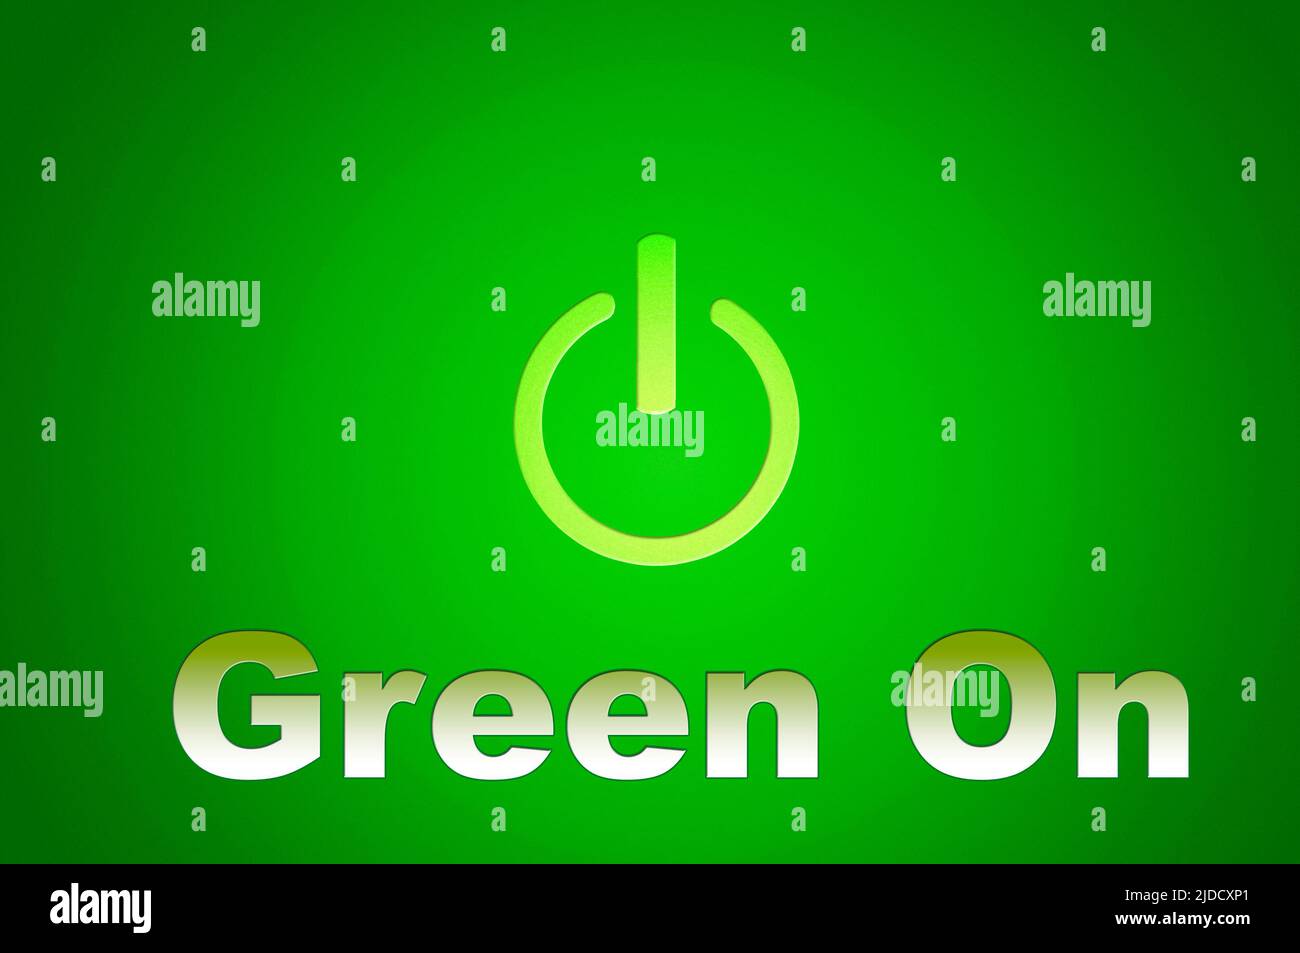 green transition and going green concept Stock Photo